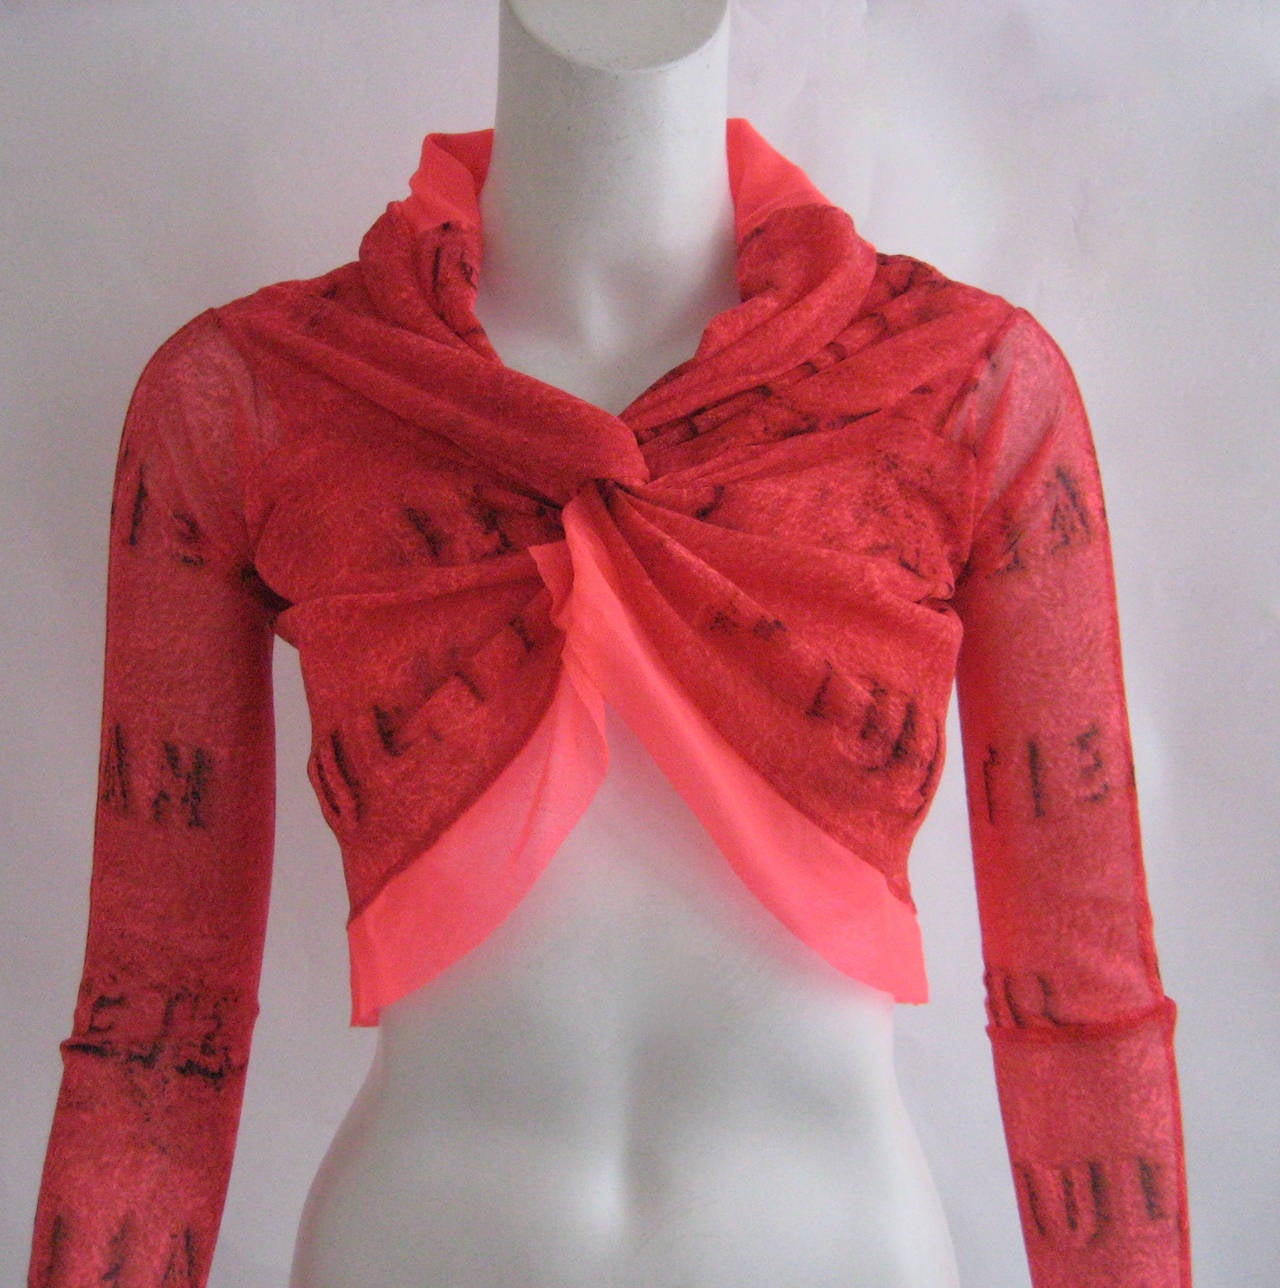 Jean Paul Gaultier Mesh Top In Excellent Condition For Sale In Chicago, IL